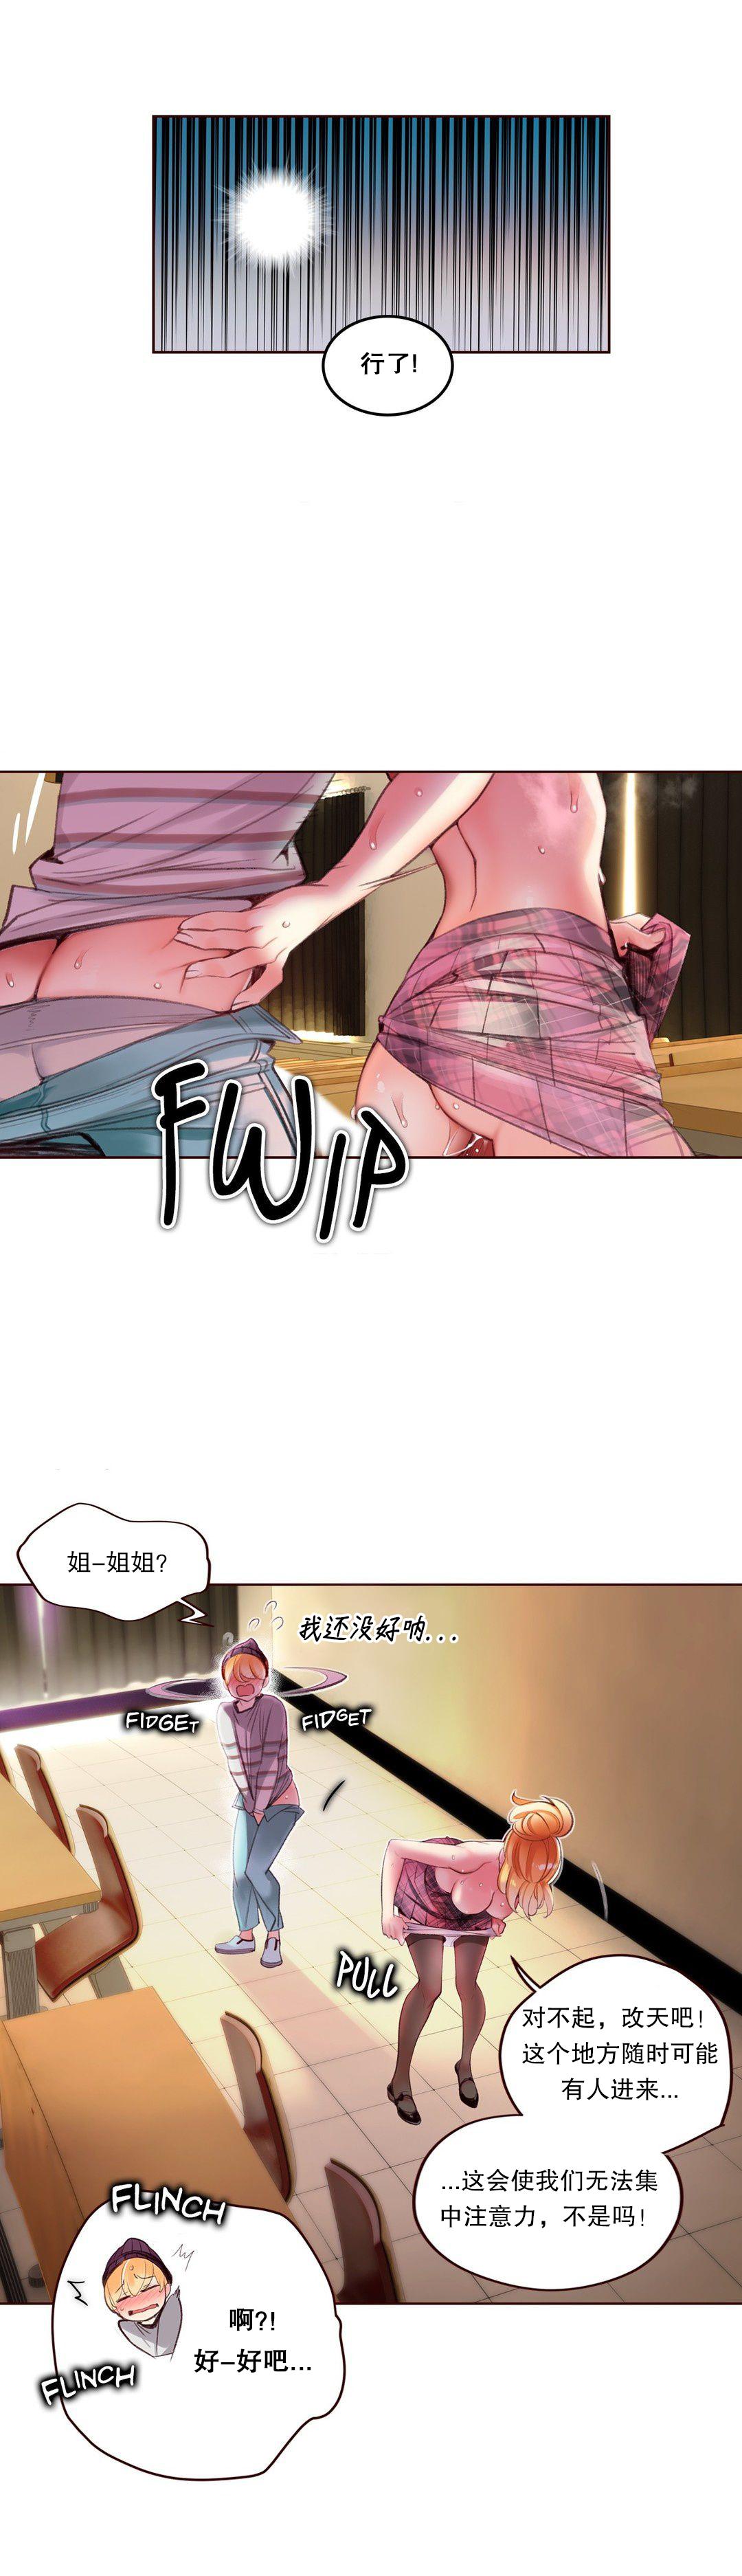 [Juder] Lilith`s Cord (第二季) Ch.61-64 [Chinese] [aaatwist个人汉化] [Ongoing] 51